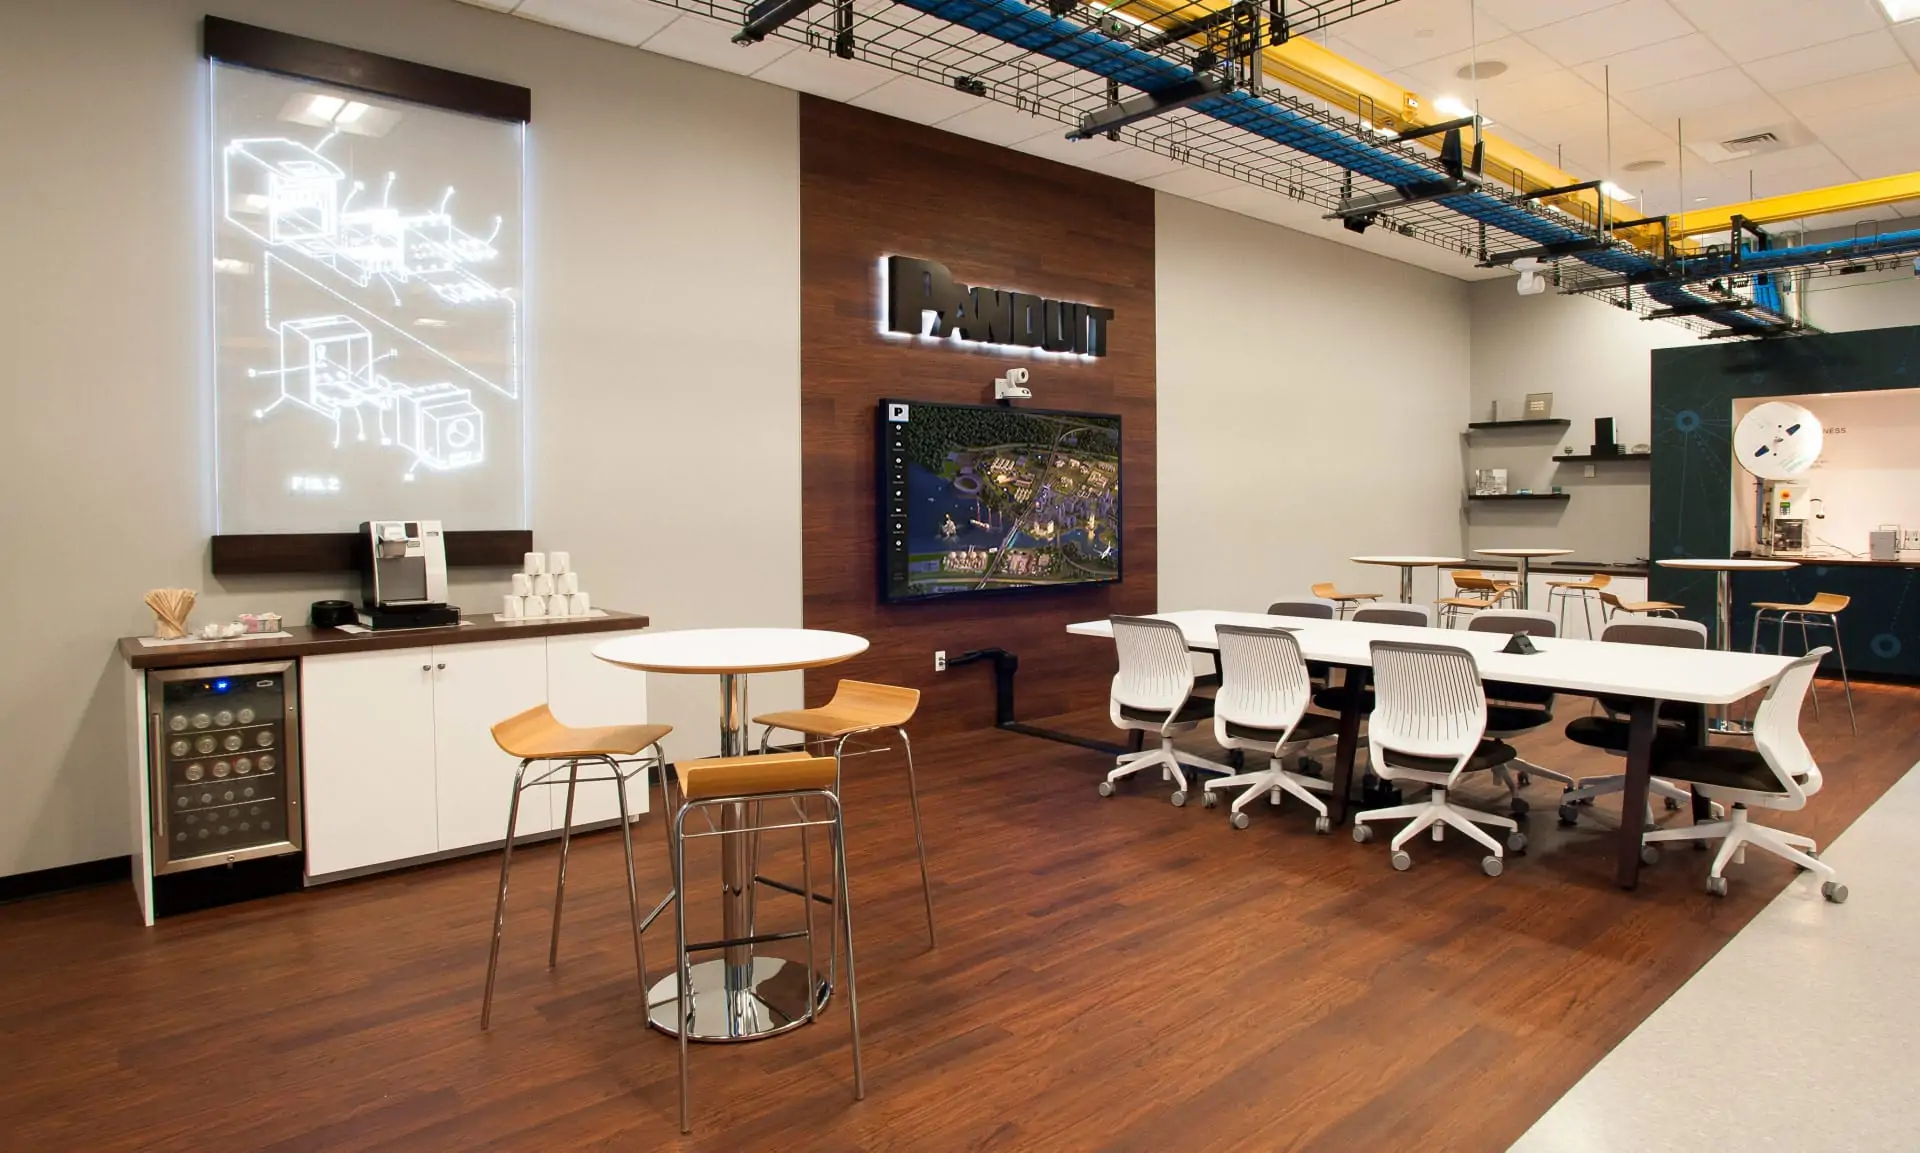 Panduit company boardroom with modern office furniture